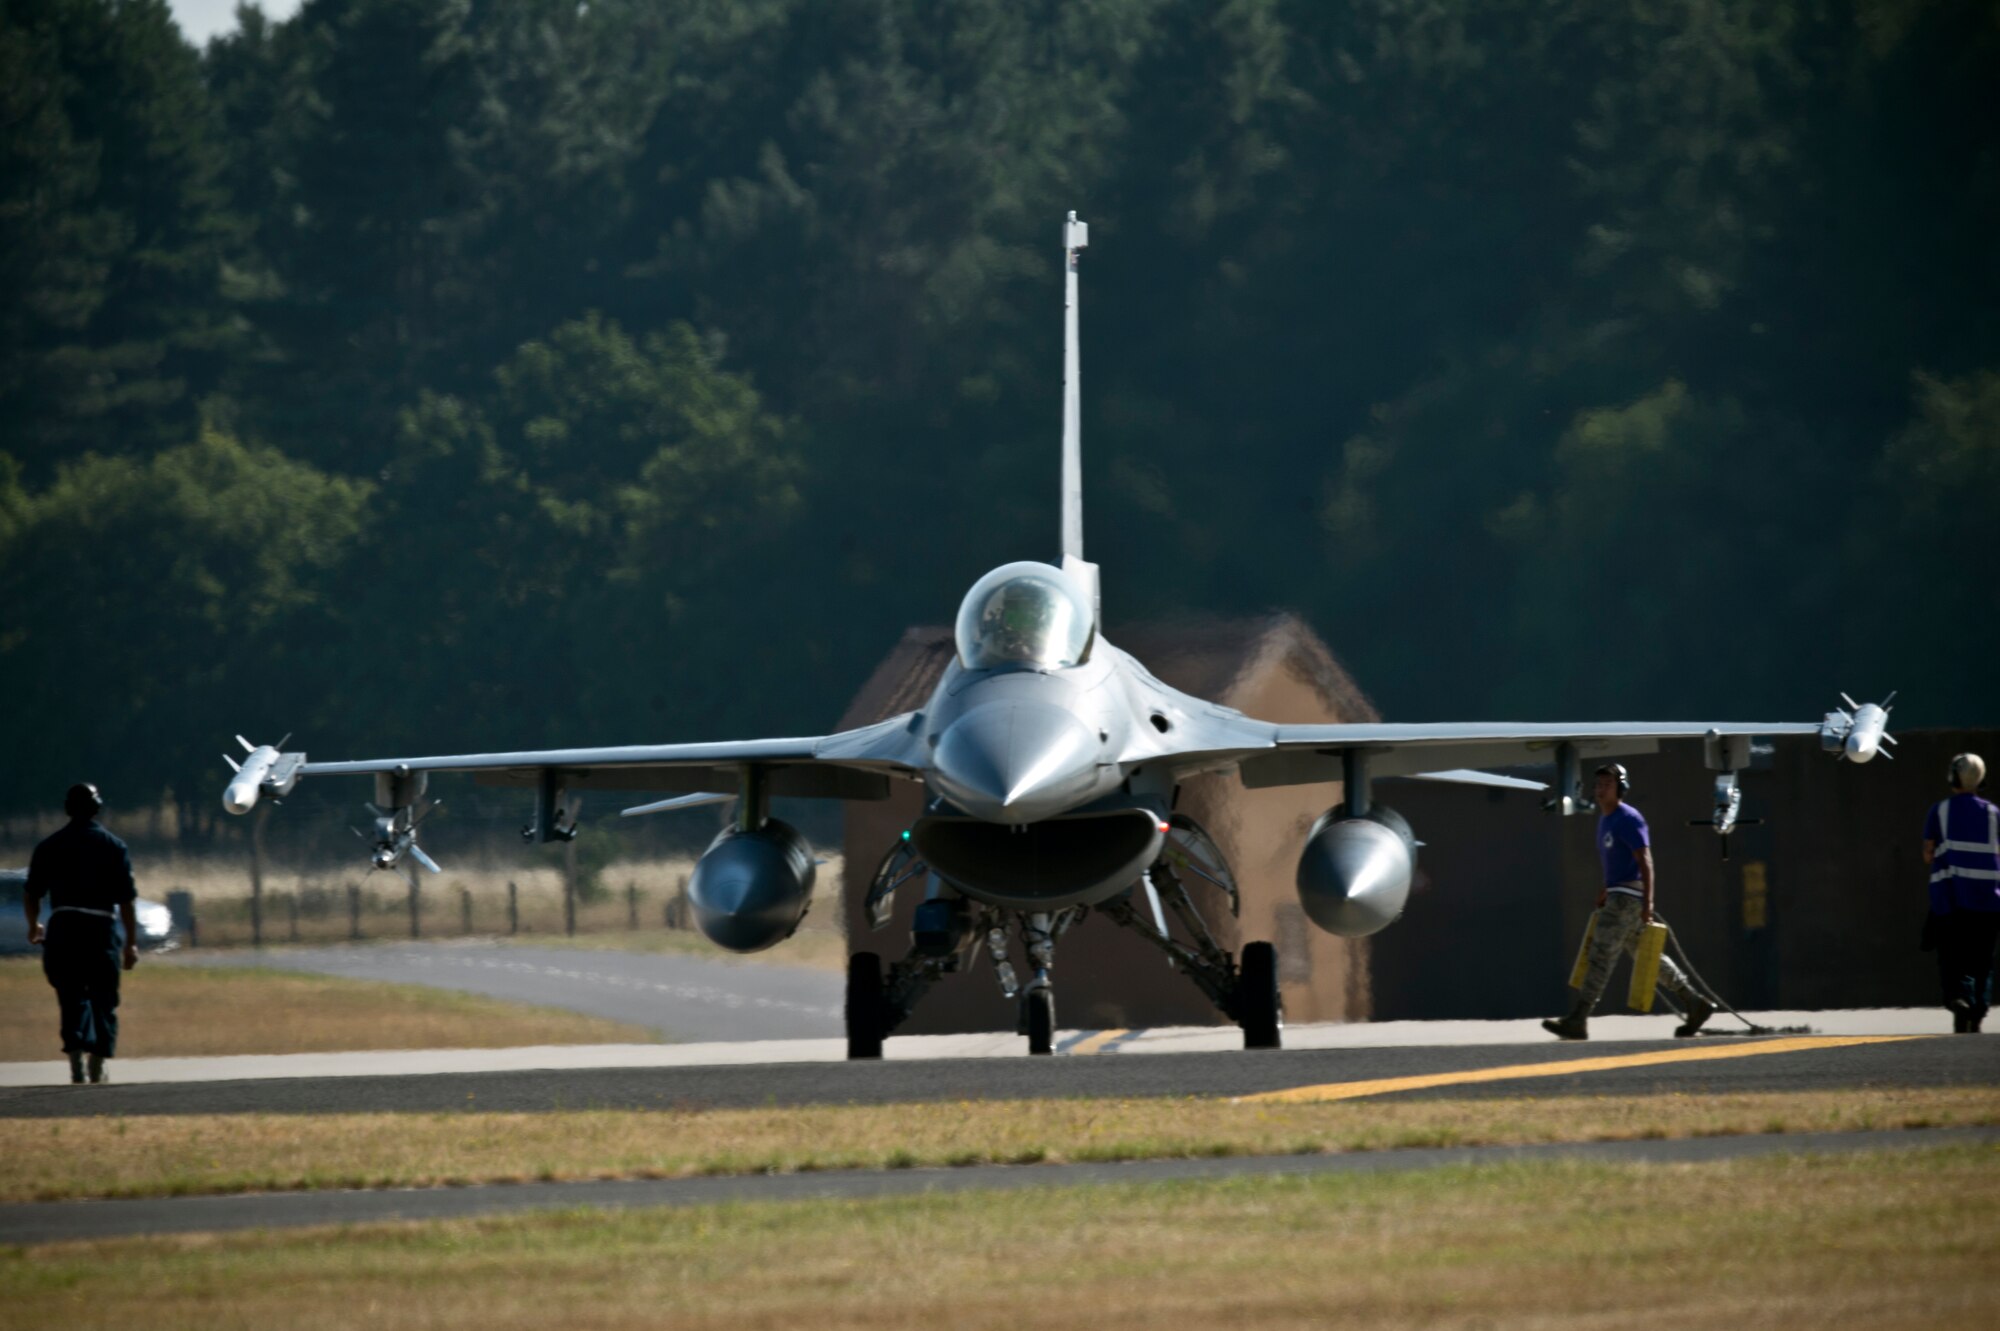 An F-16C Fighting Falcon from the 31st Fighter Wing, 510th Fighter Squadron, Aviano Air Base, Italy, prepares to taxi to the runway at Royal Air Force Lakenheath, England, Aug. 3, 2018. The 501th FS "Buzzards" completed a two-week flying training deployment to the United Kingdom Aug. 6, 2018. (U.S. Air Force photo by Master Sgt. Eric Burks)